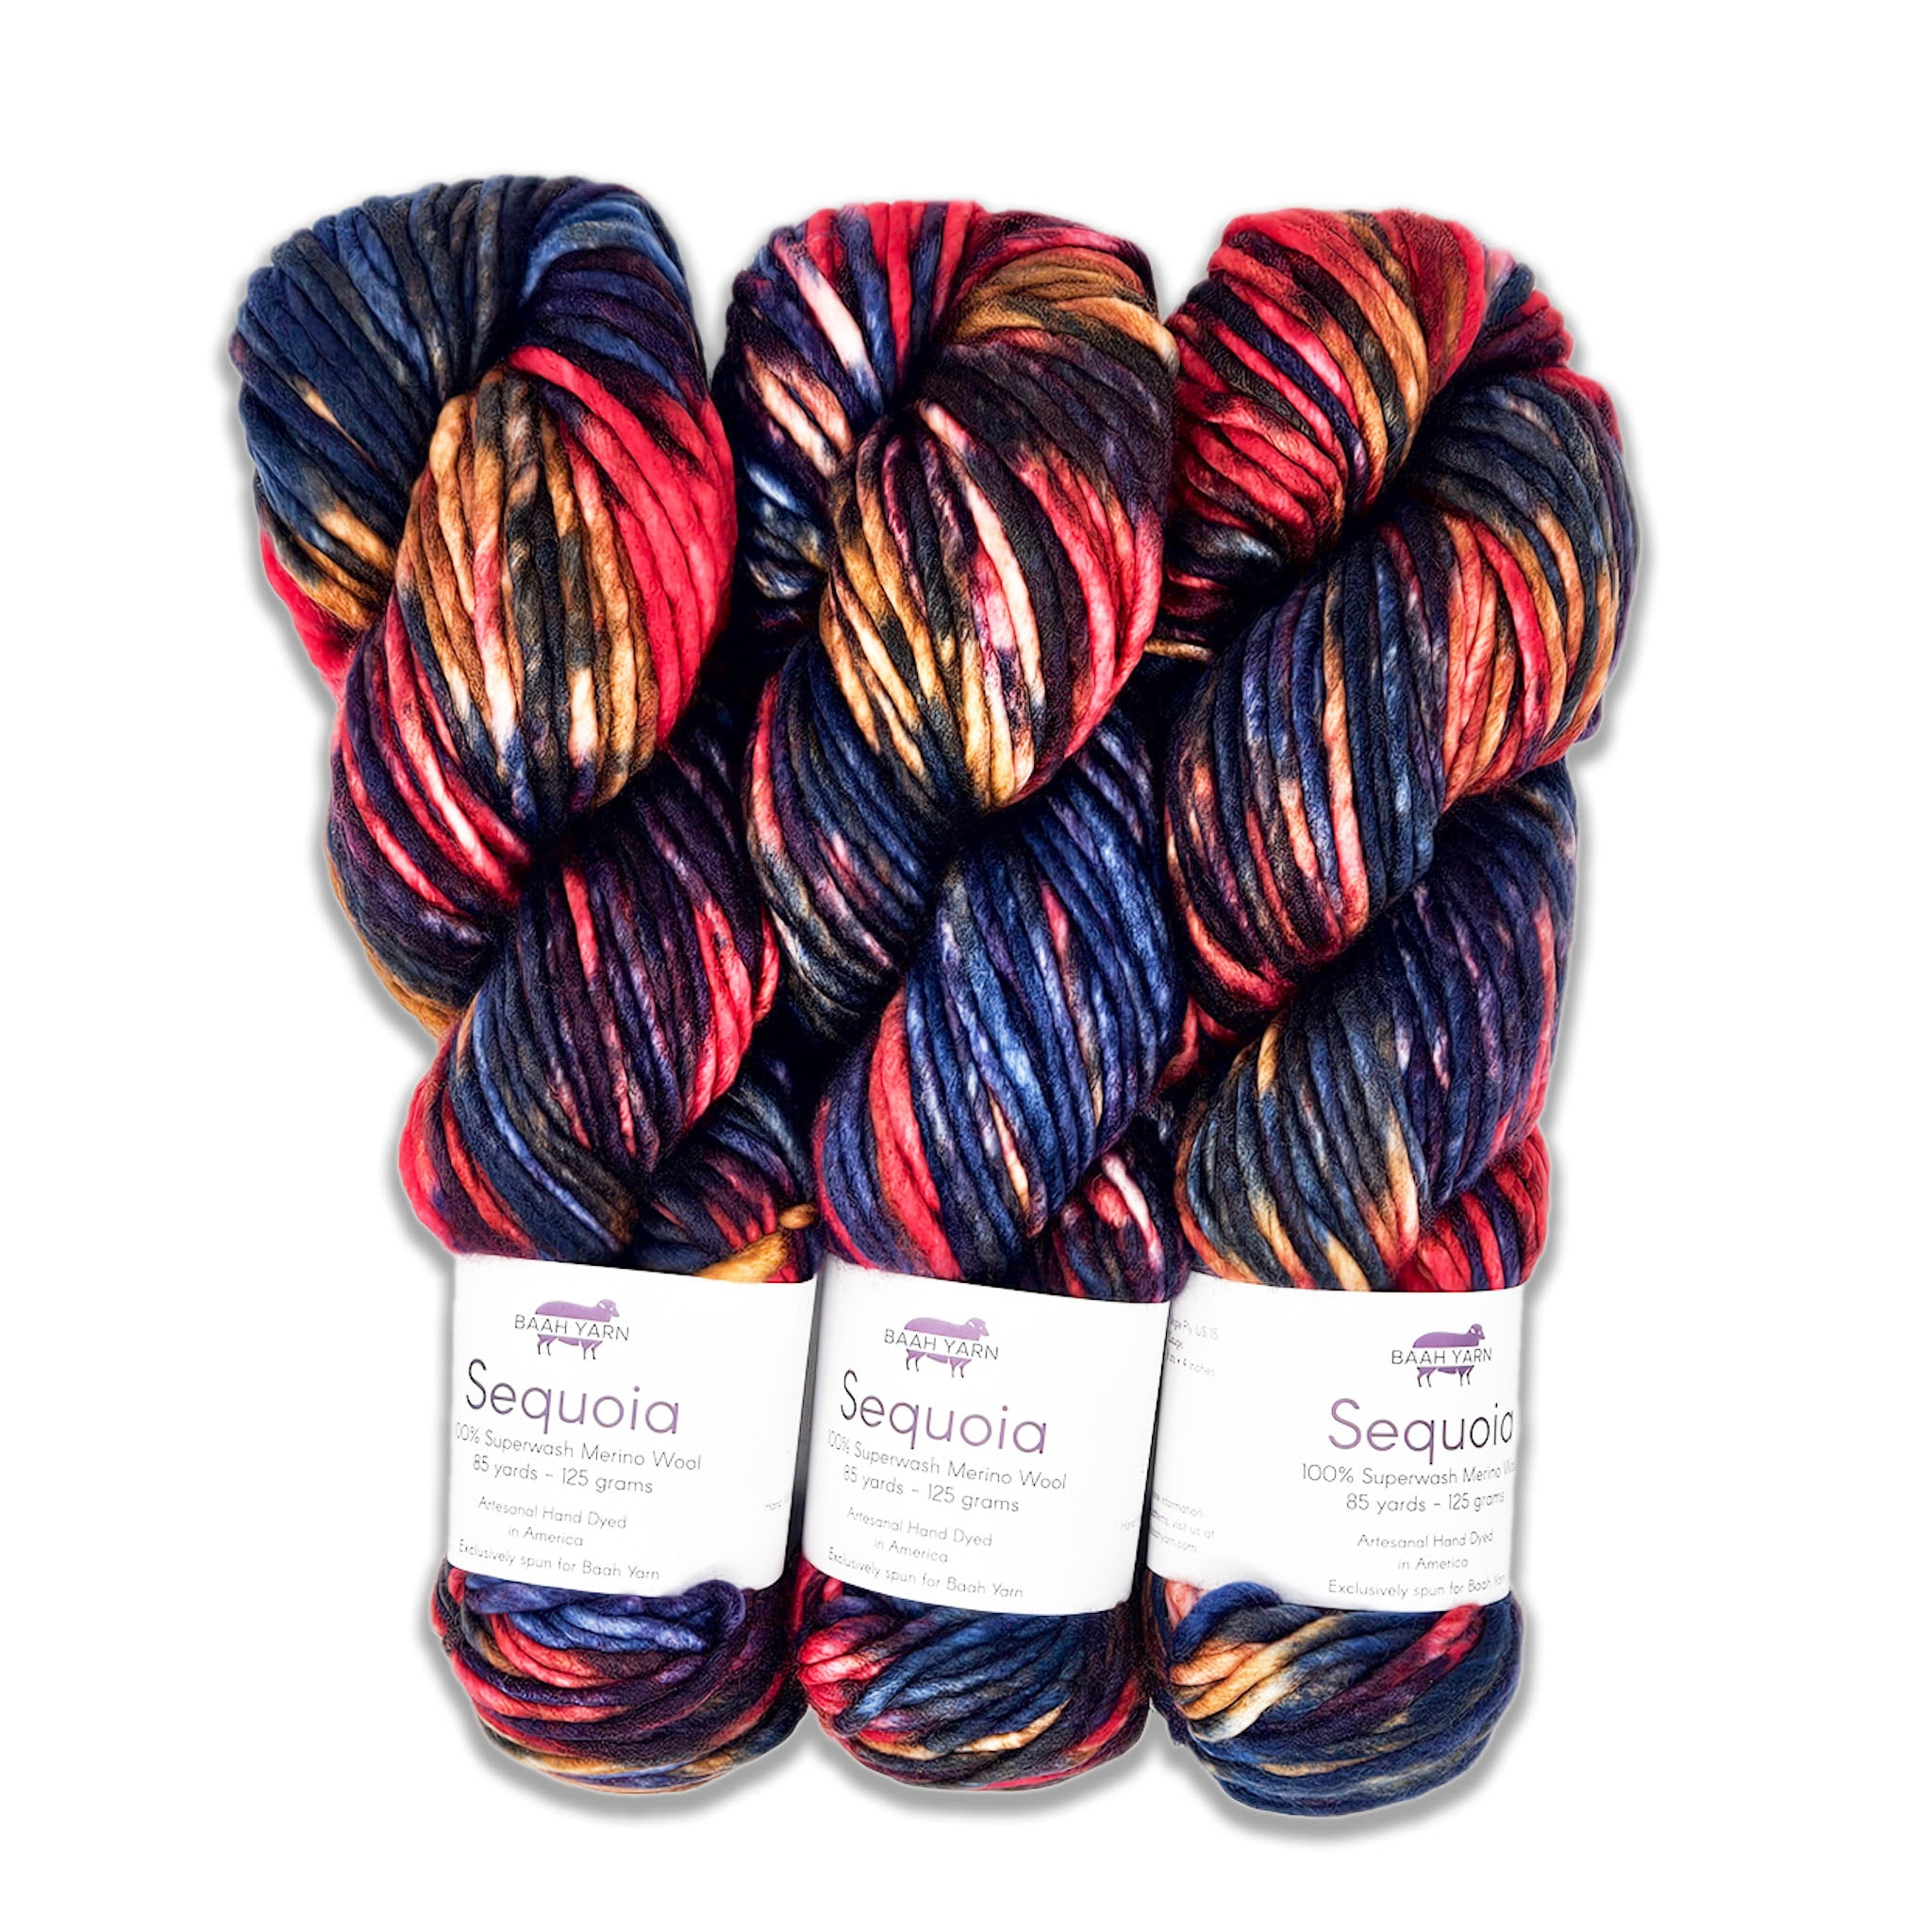 Baah Yarn Sequoia - Get it While it's Hot! - 0